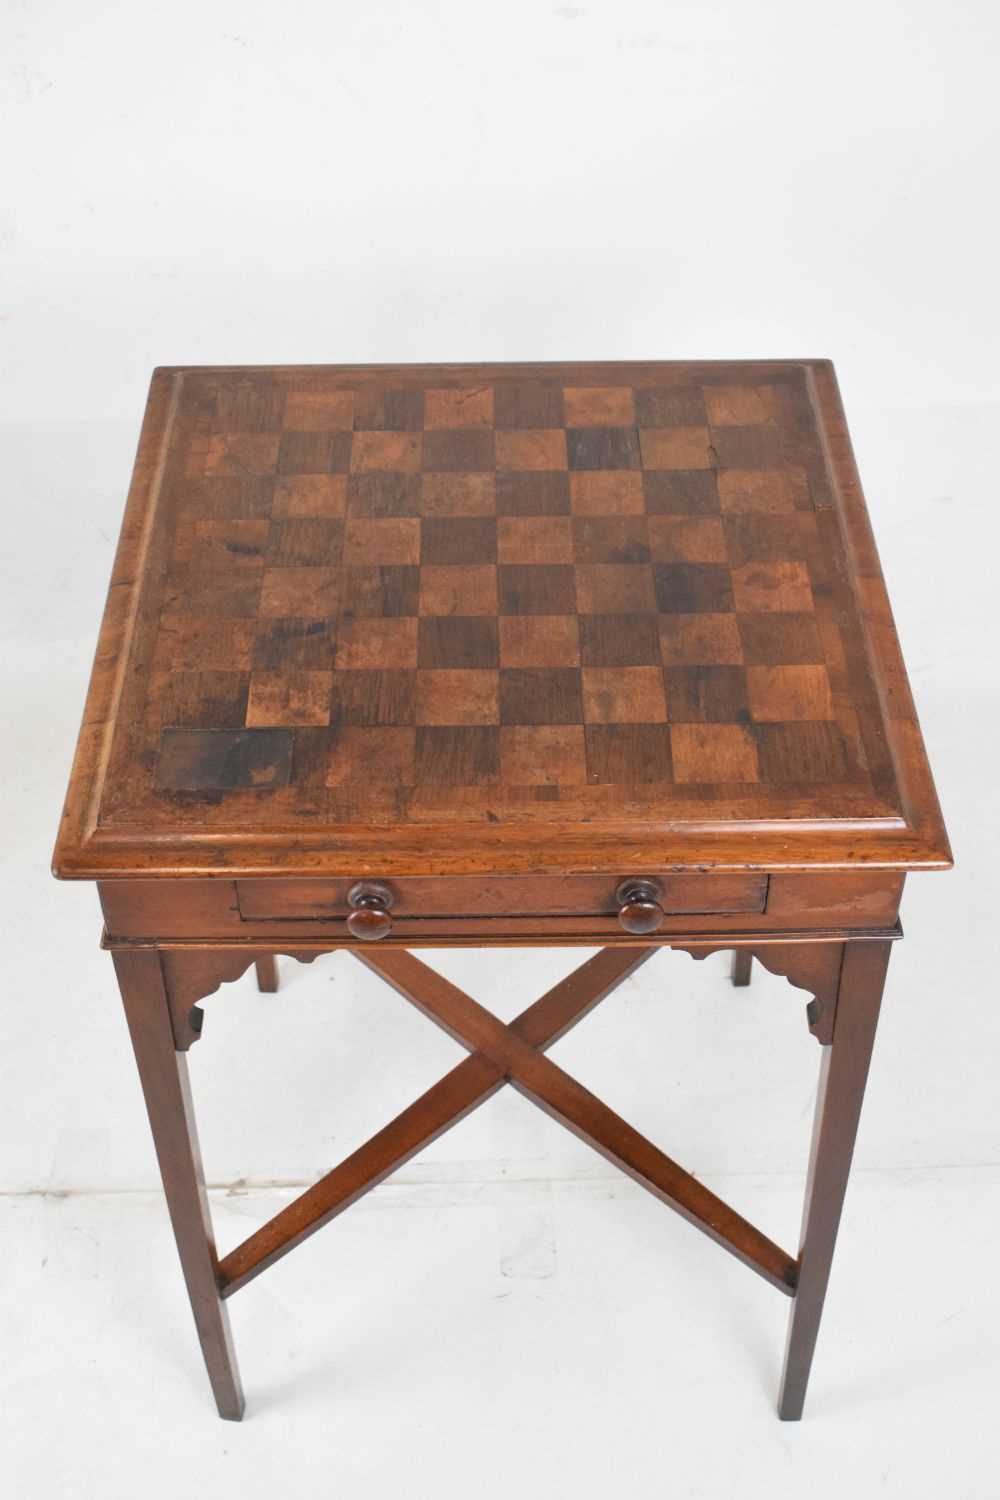 Early 19th Century inlaid walnut games table - Image 2 of 9